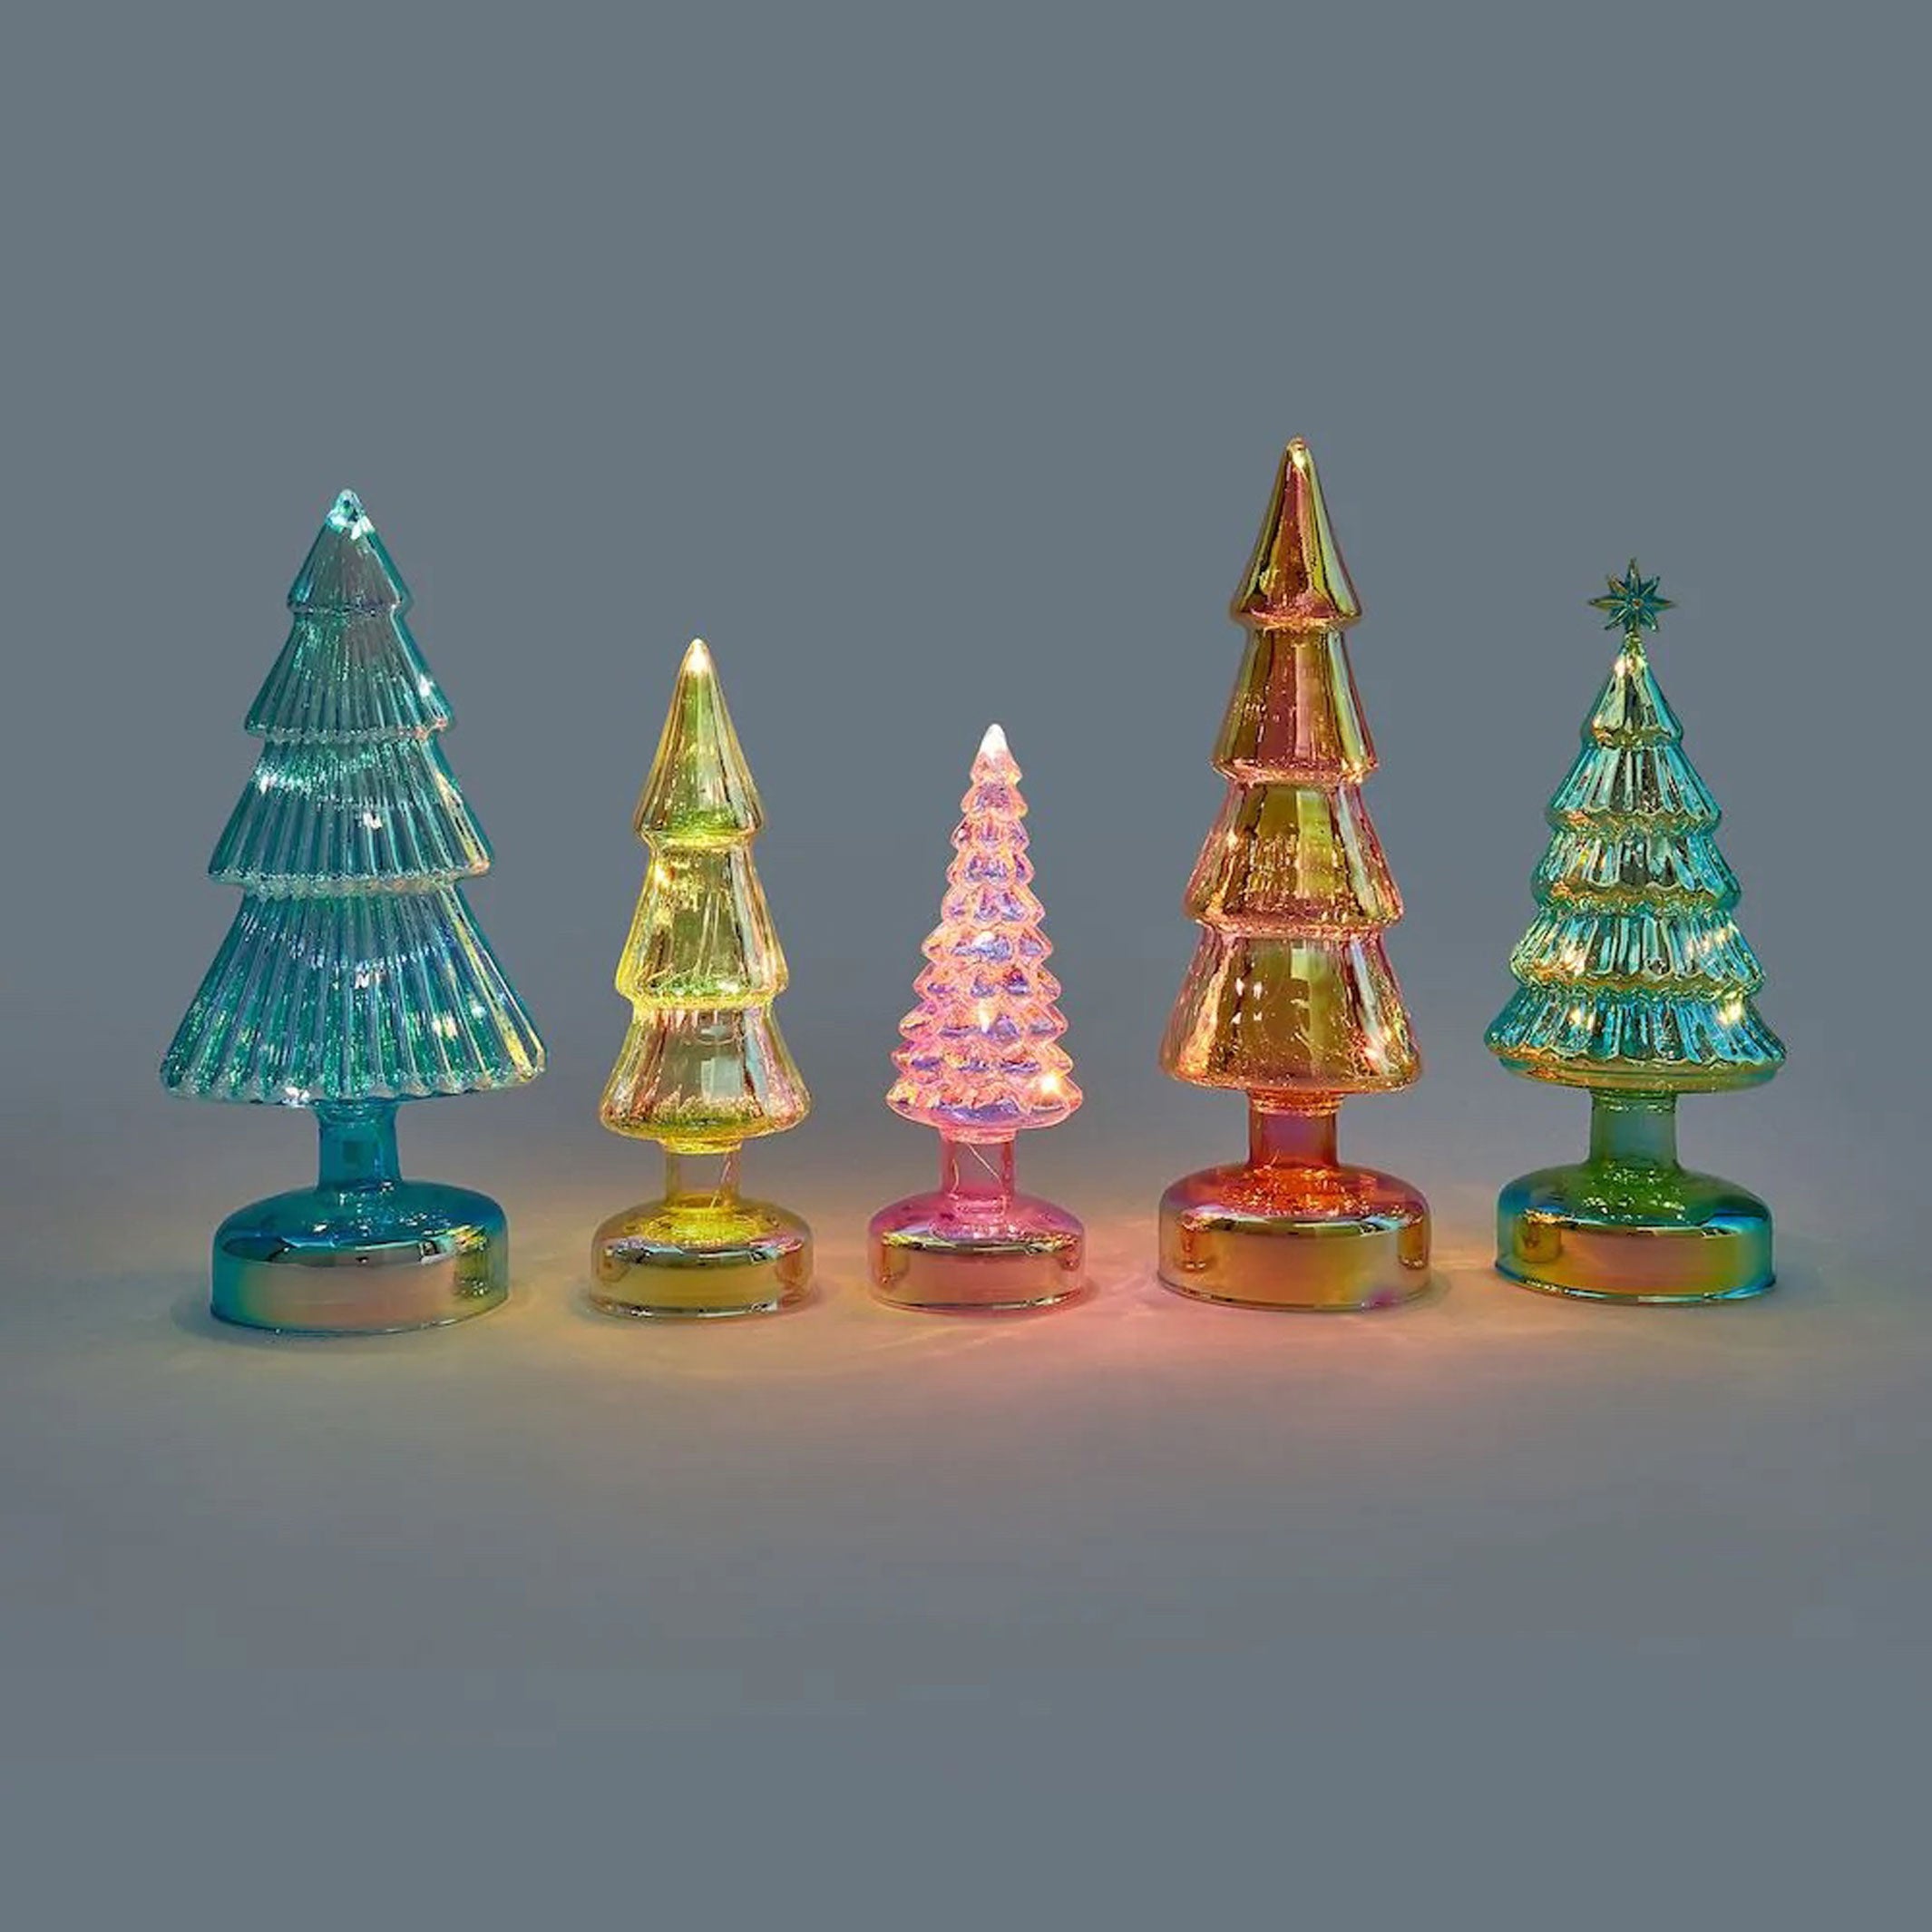 Glas-TANNENBÄUME Small GLASS Bele LIGHTED LED mit | TREES LED Colorful